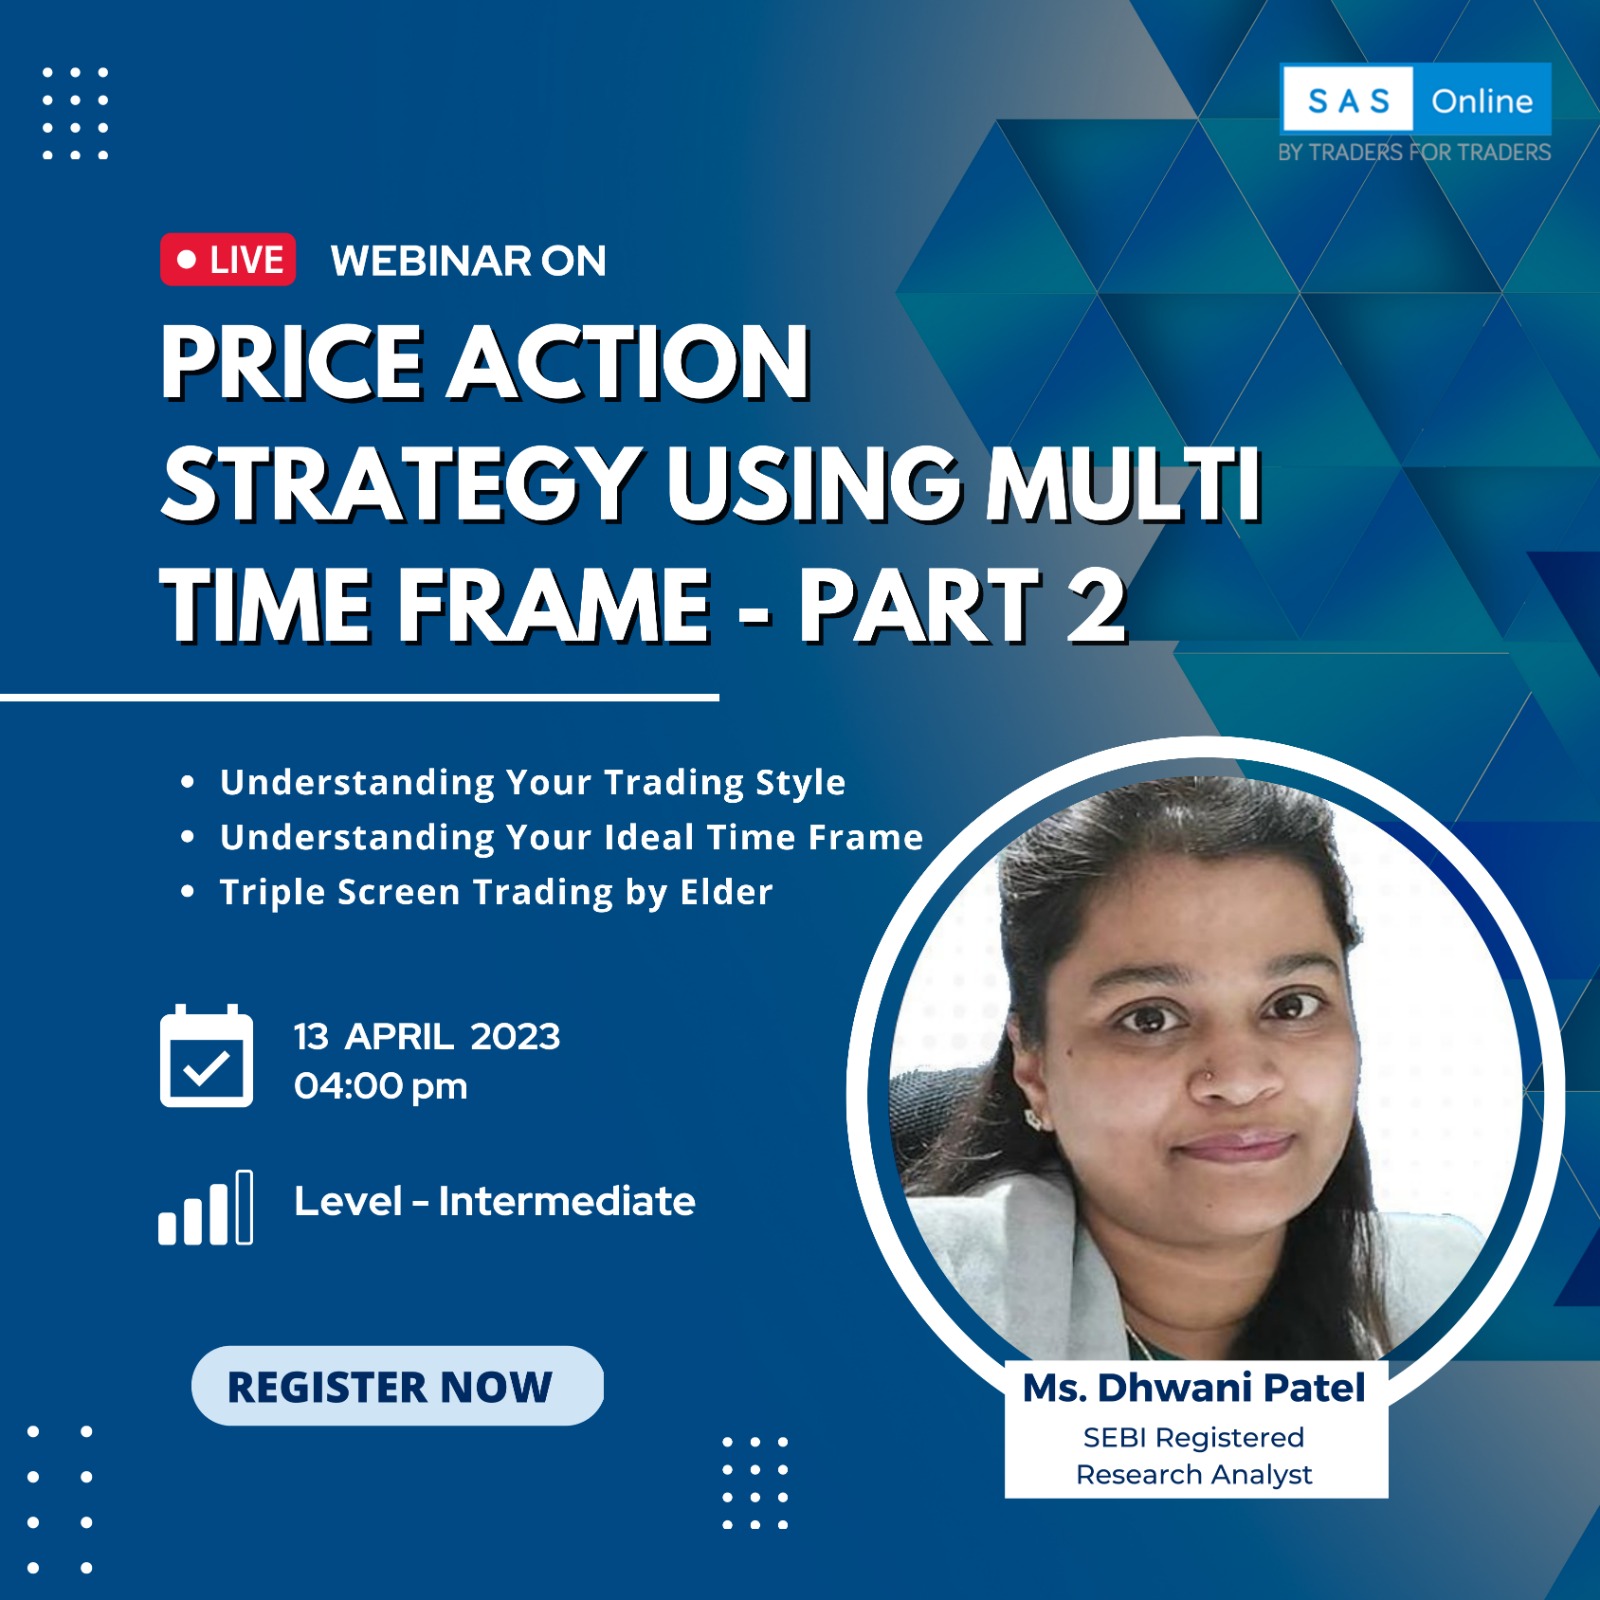 Price Action Strategy using Multi Time Frame - Part 2